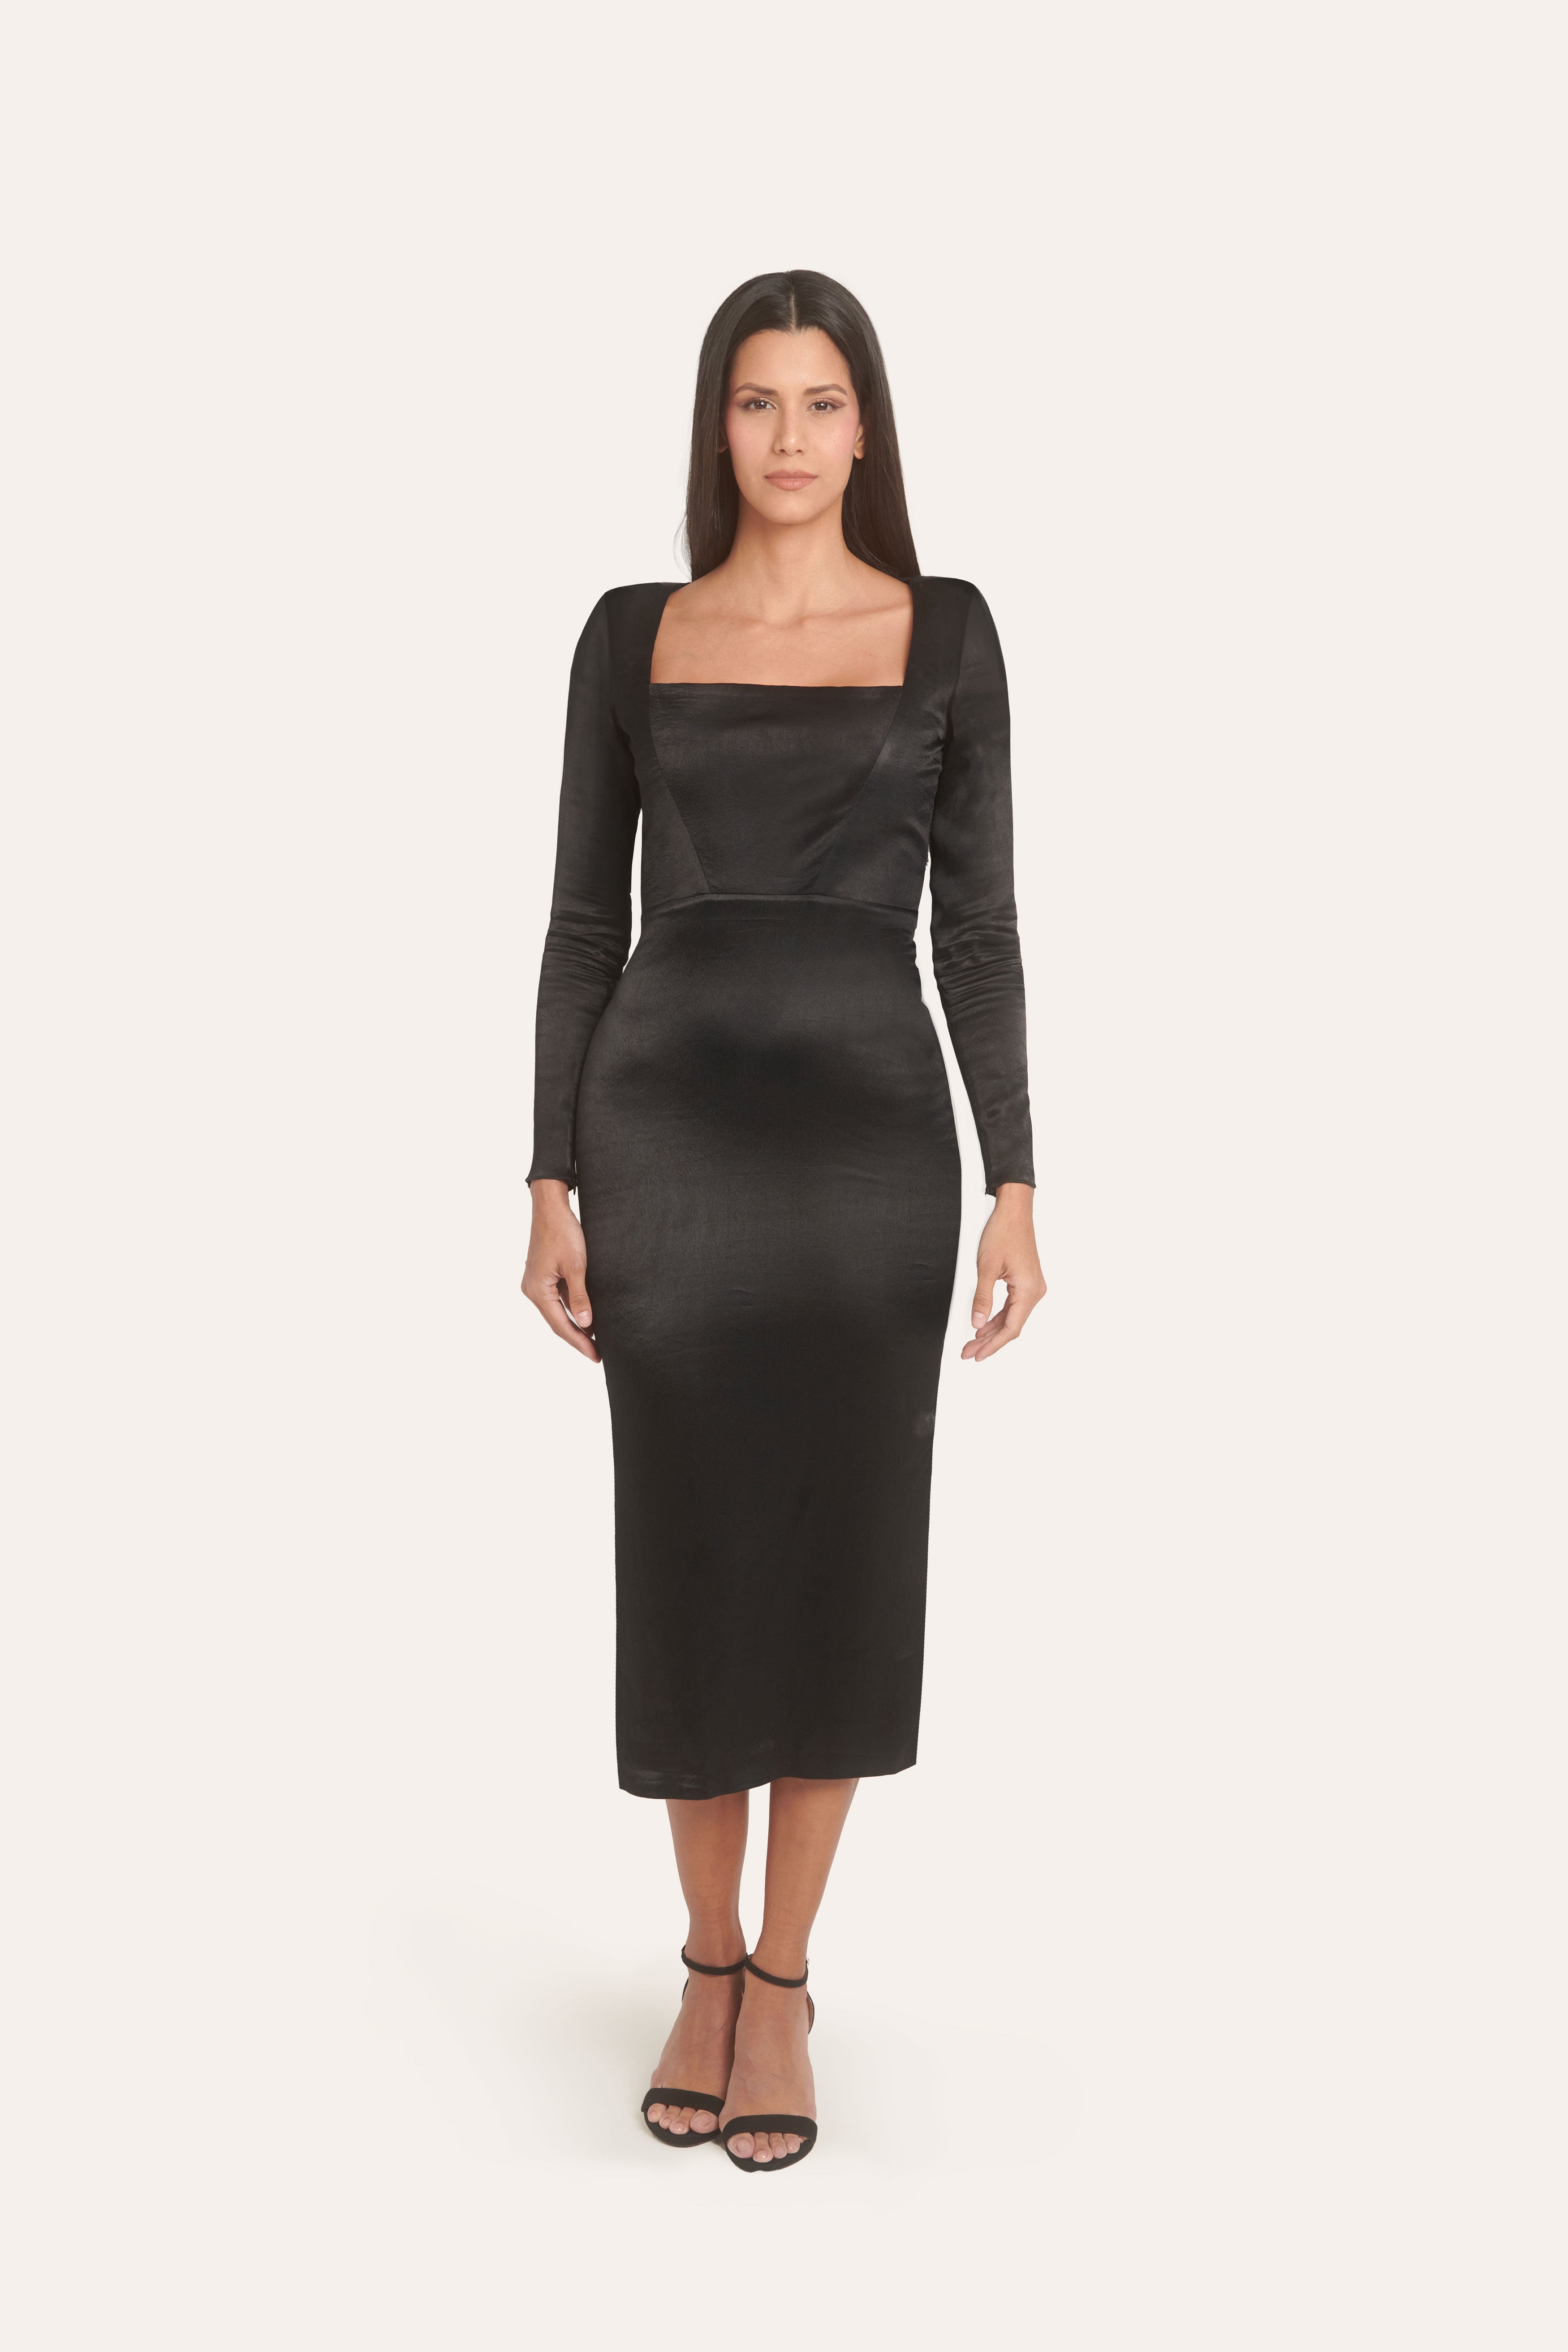 Black midi long-sleeved fitted dress